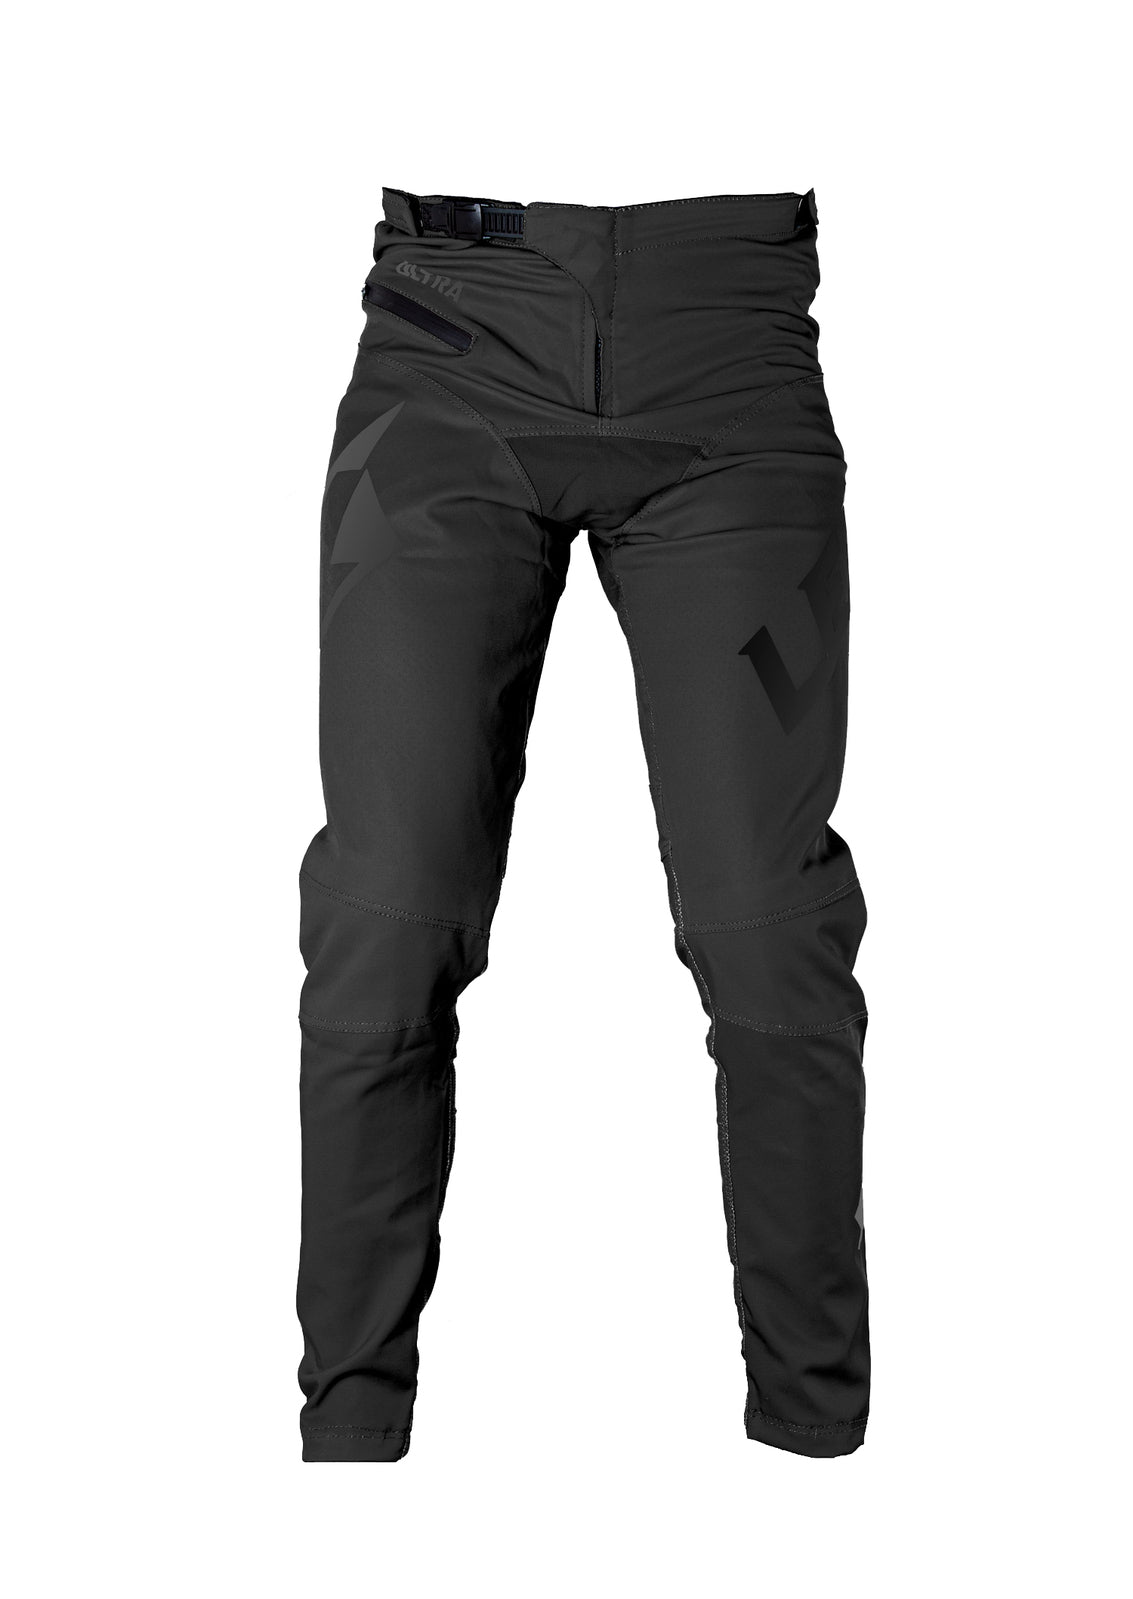 A pair of Lead Ultra Pants with a zipper on the side, ideal for reducing drag and serving as fitted race wear.